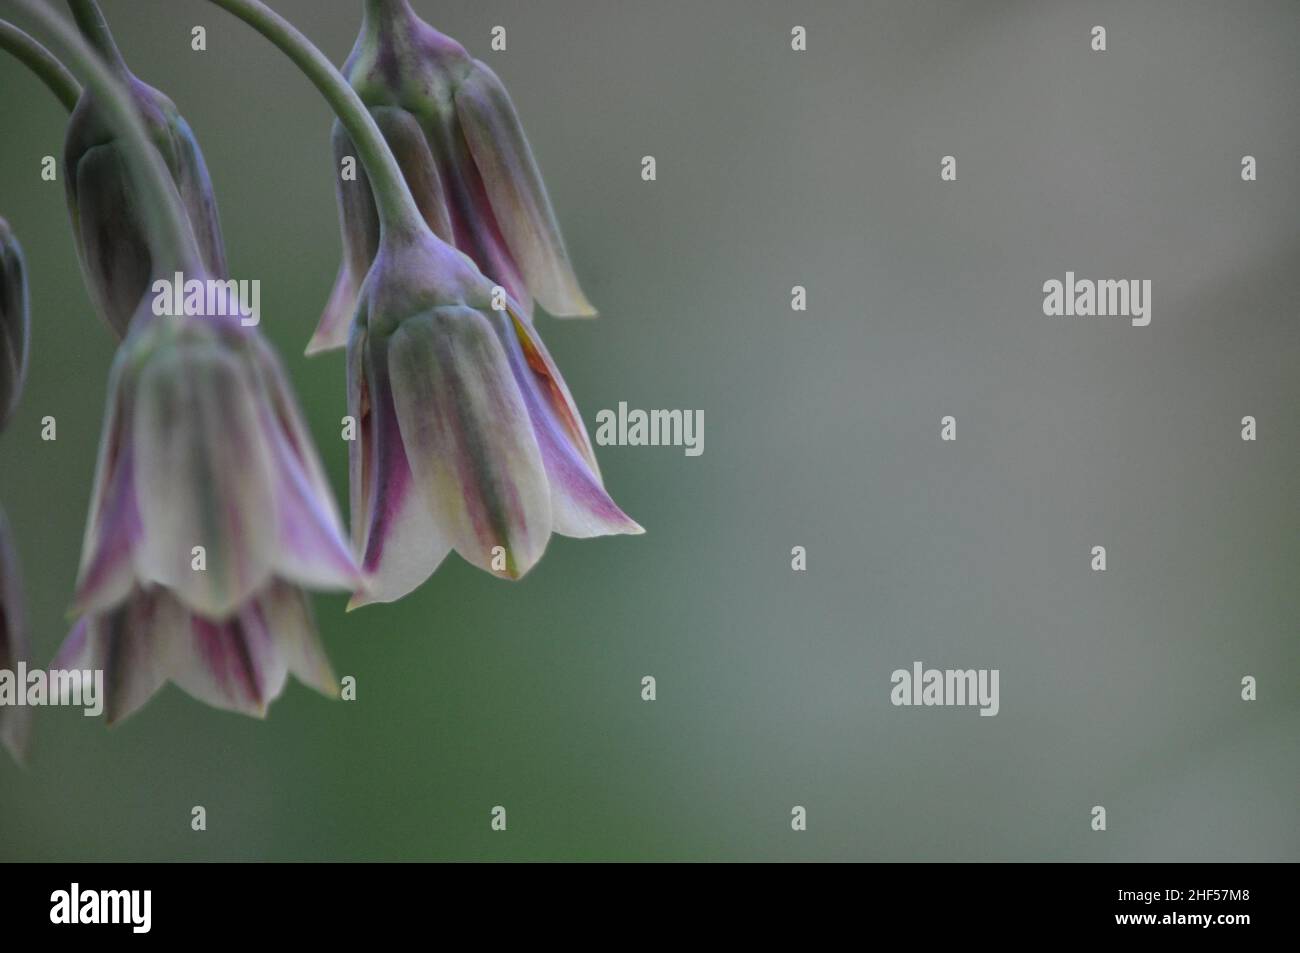 A close up photograph of Sicilian Honey Garlic (Nectaroscordum siculum) set against a blurred background with copy space Stock Photo